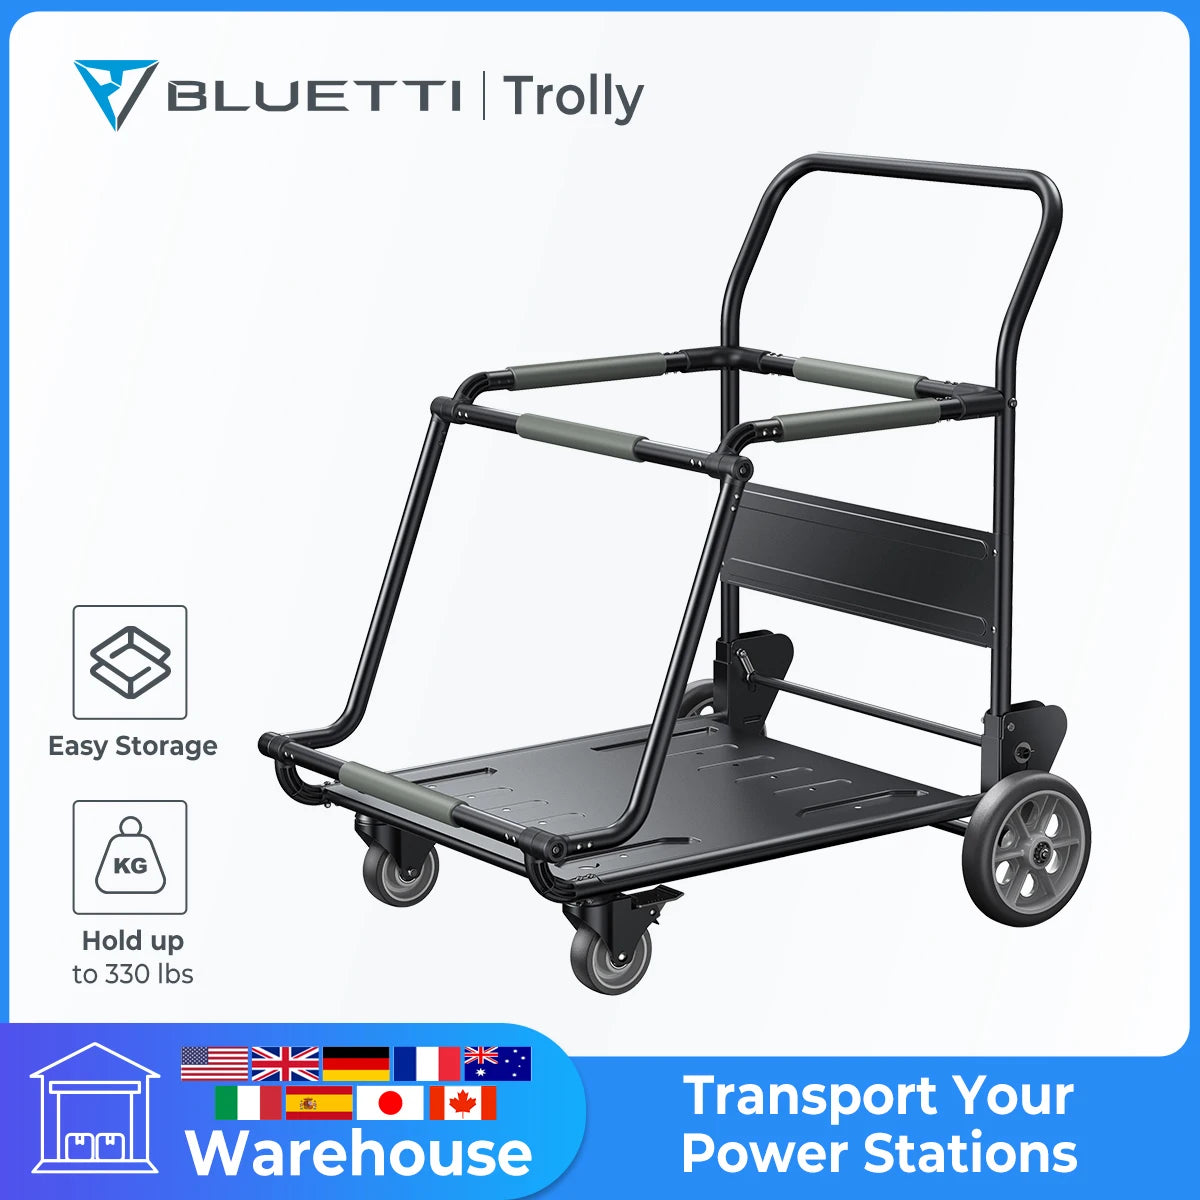 BlUETTI Folding Trolley Design For Transport Your Power Stations Up To 330 Lbs Foldable Trolley Carry Your Furniture Gardening - IHavePaws